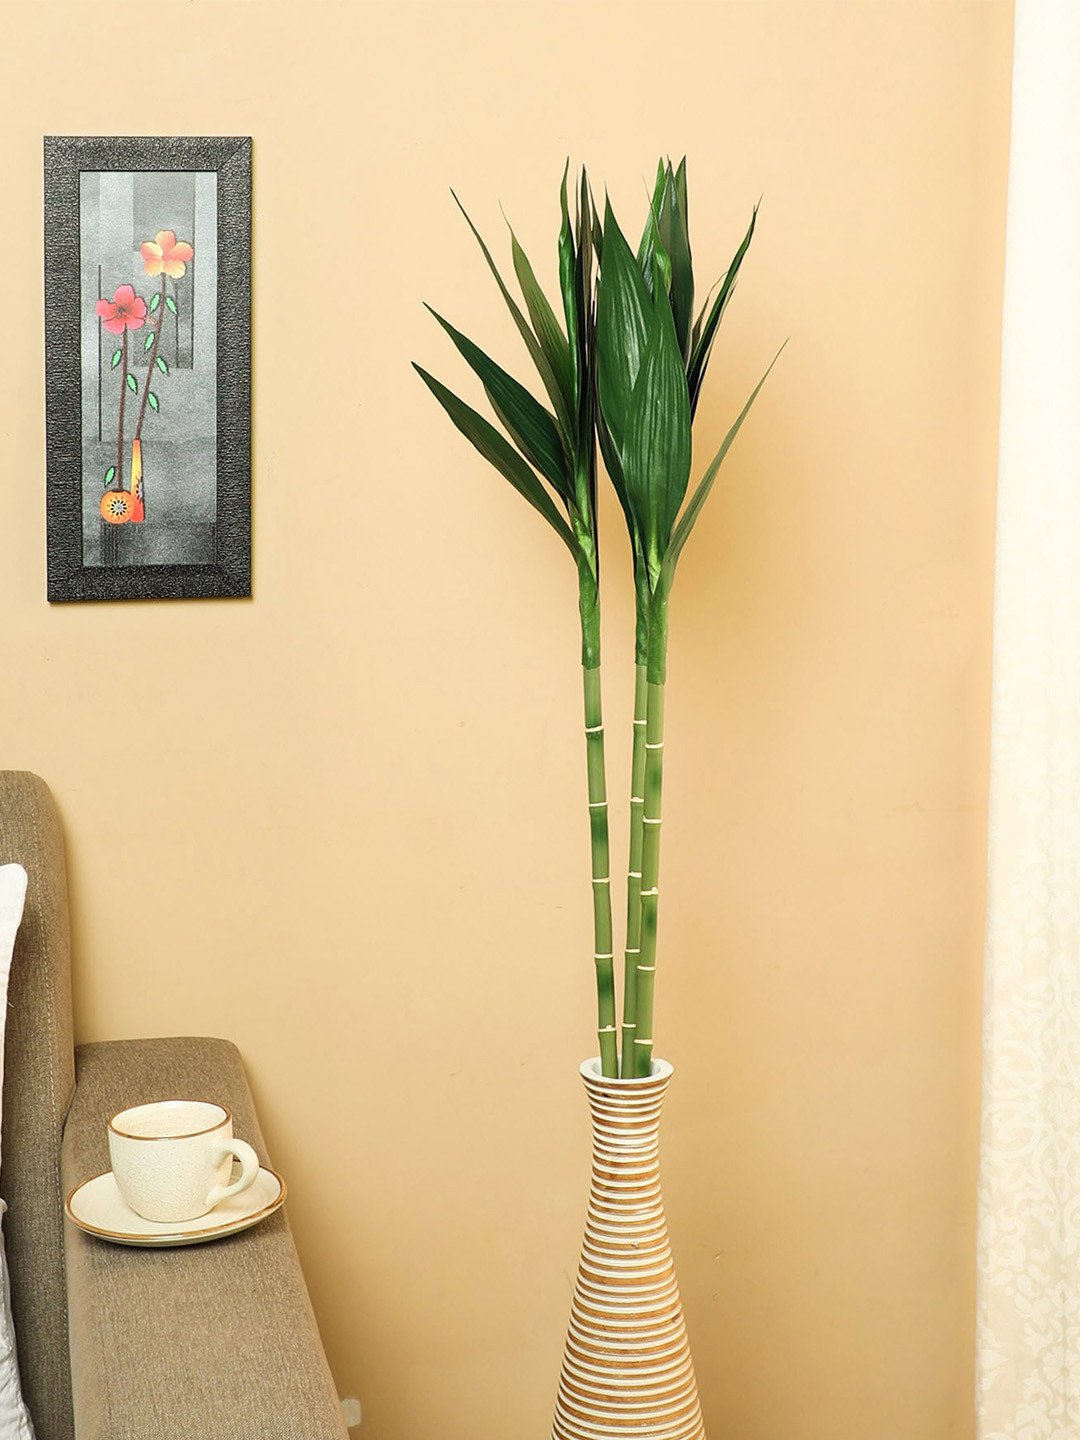 PolliNation Artificial Bamboo Palm Plant Without Pot, Set of 2